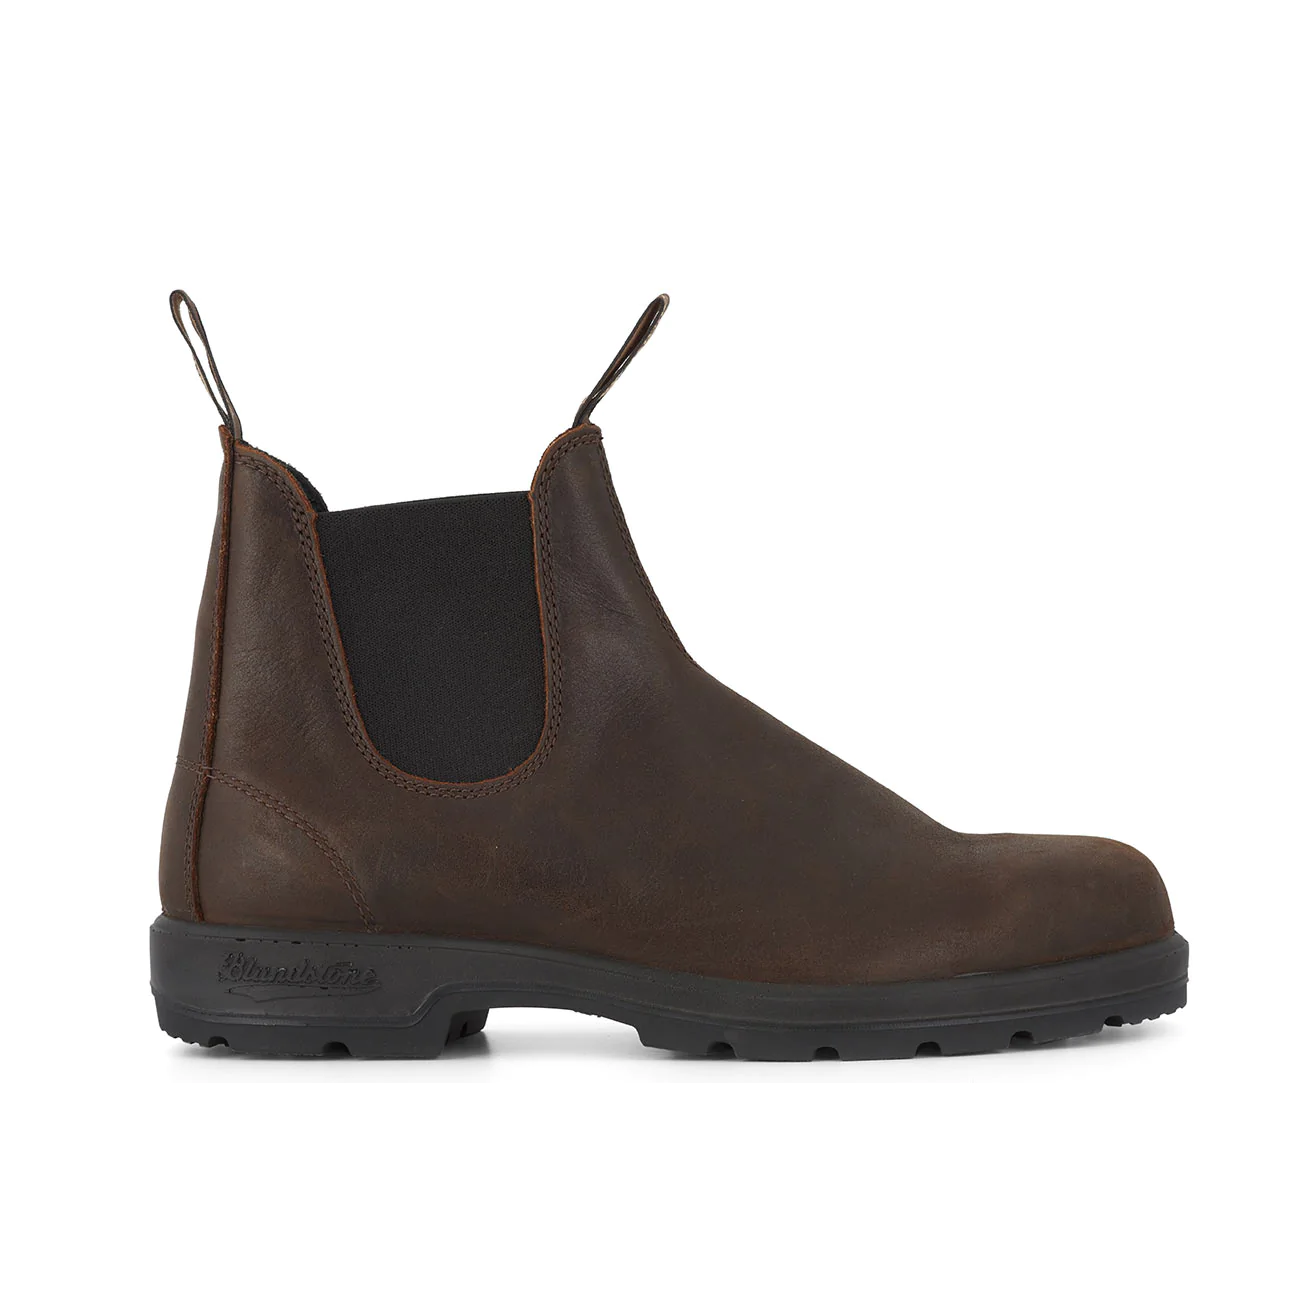 Blundstone 1609 Classic Antique Brown Chelsea Boots – Sam Turner